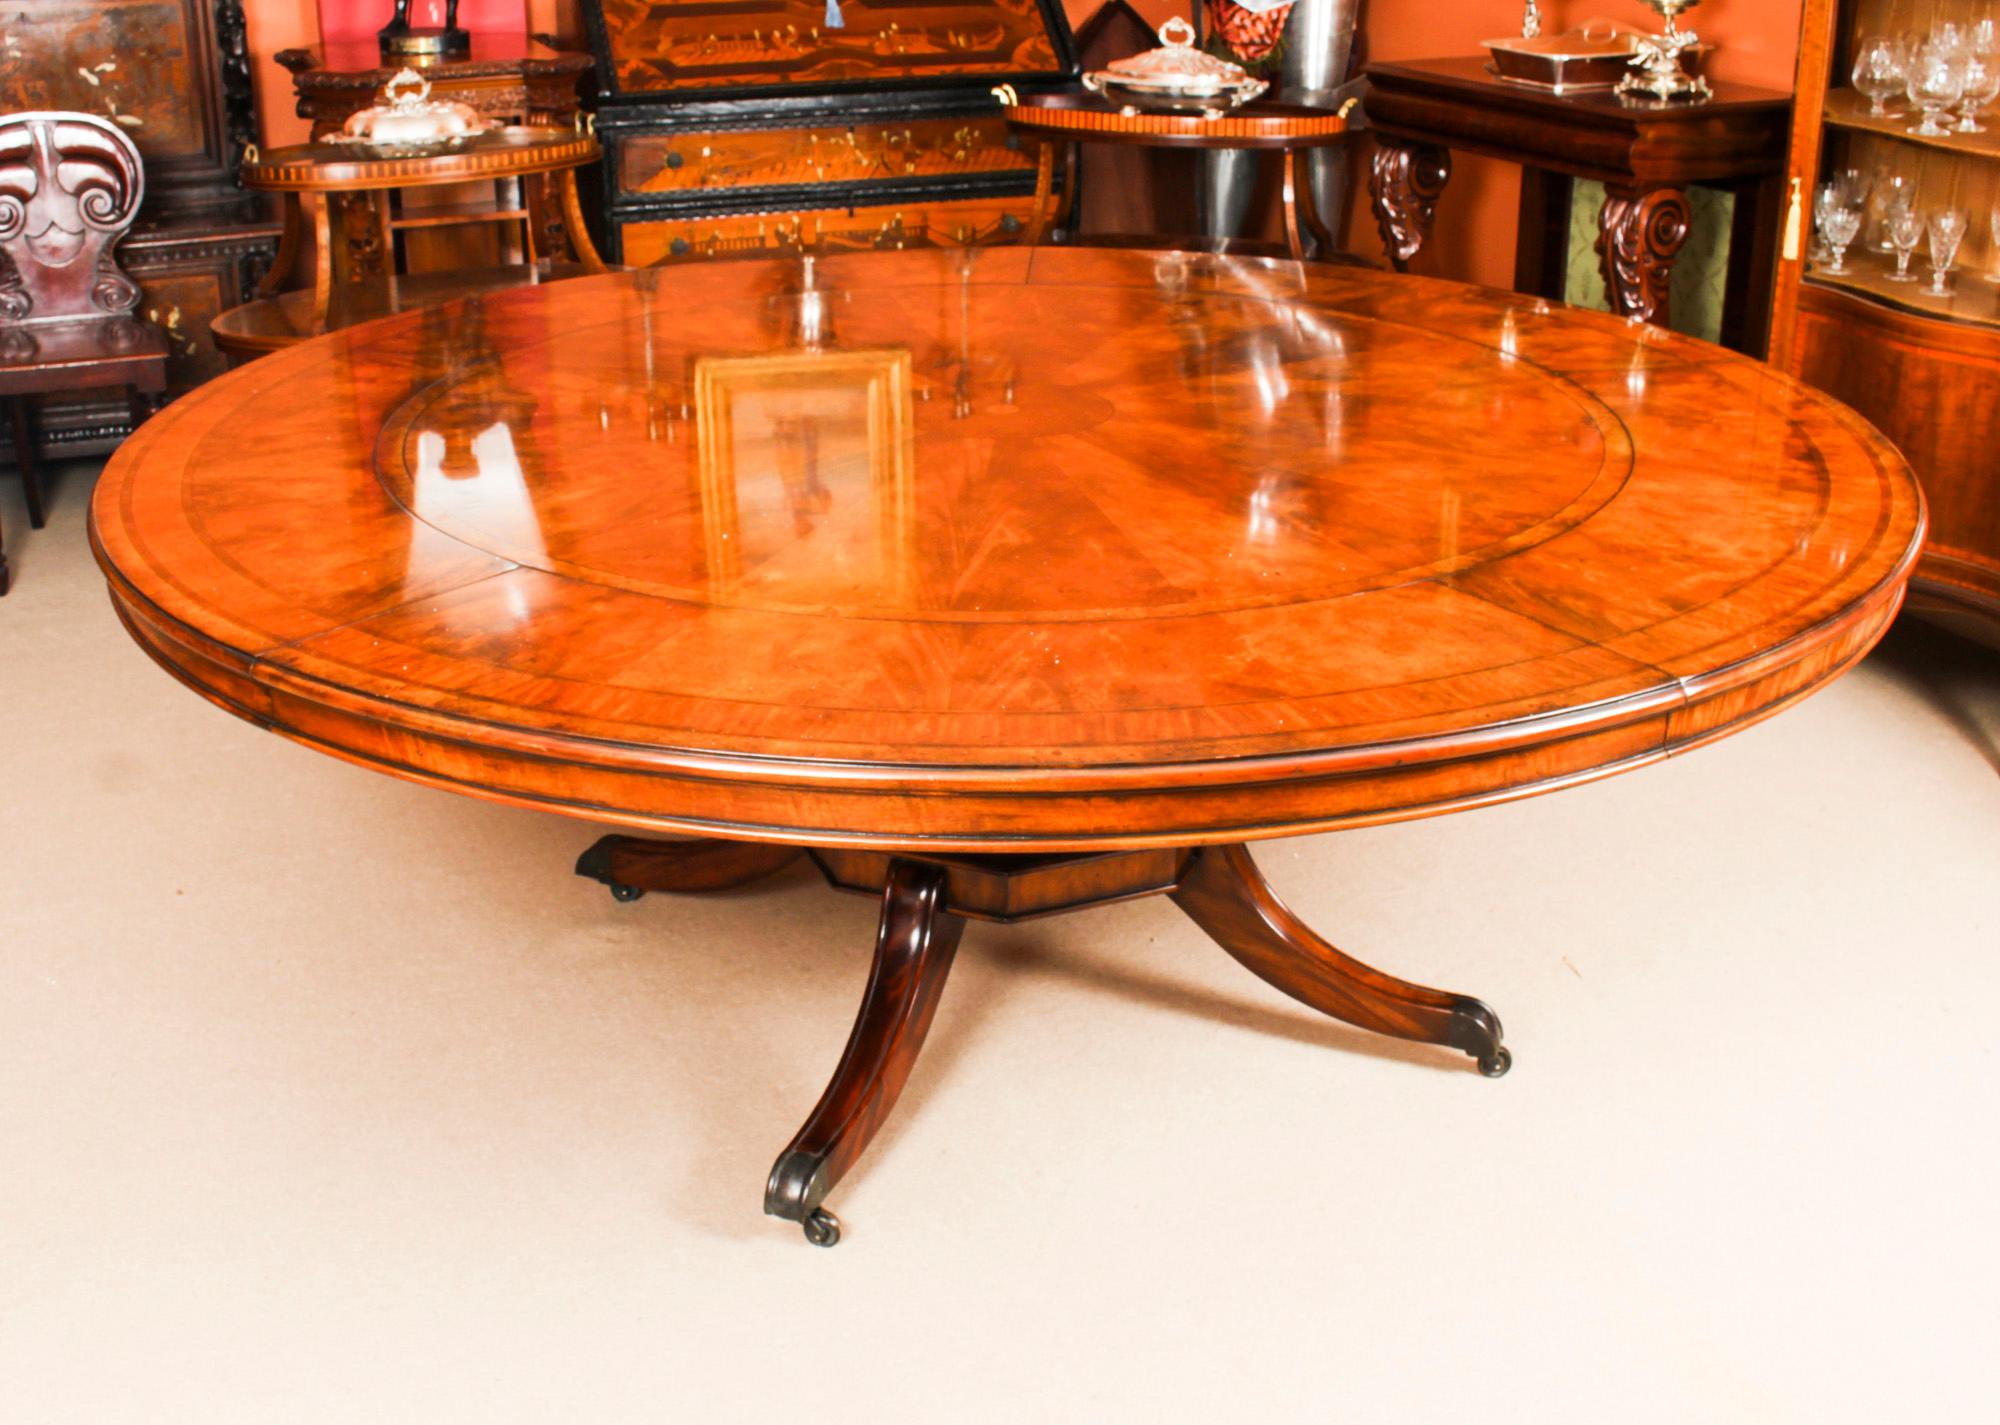 English Vintage Diameter Flame Mahogany Jupe Dining Table & 8 Chairs 20th C